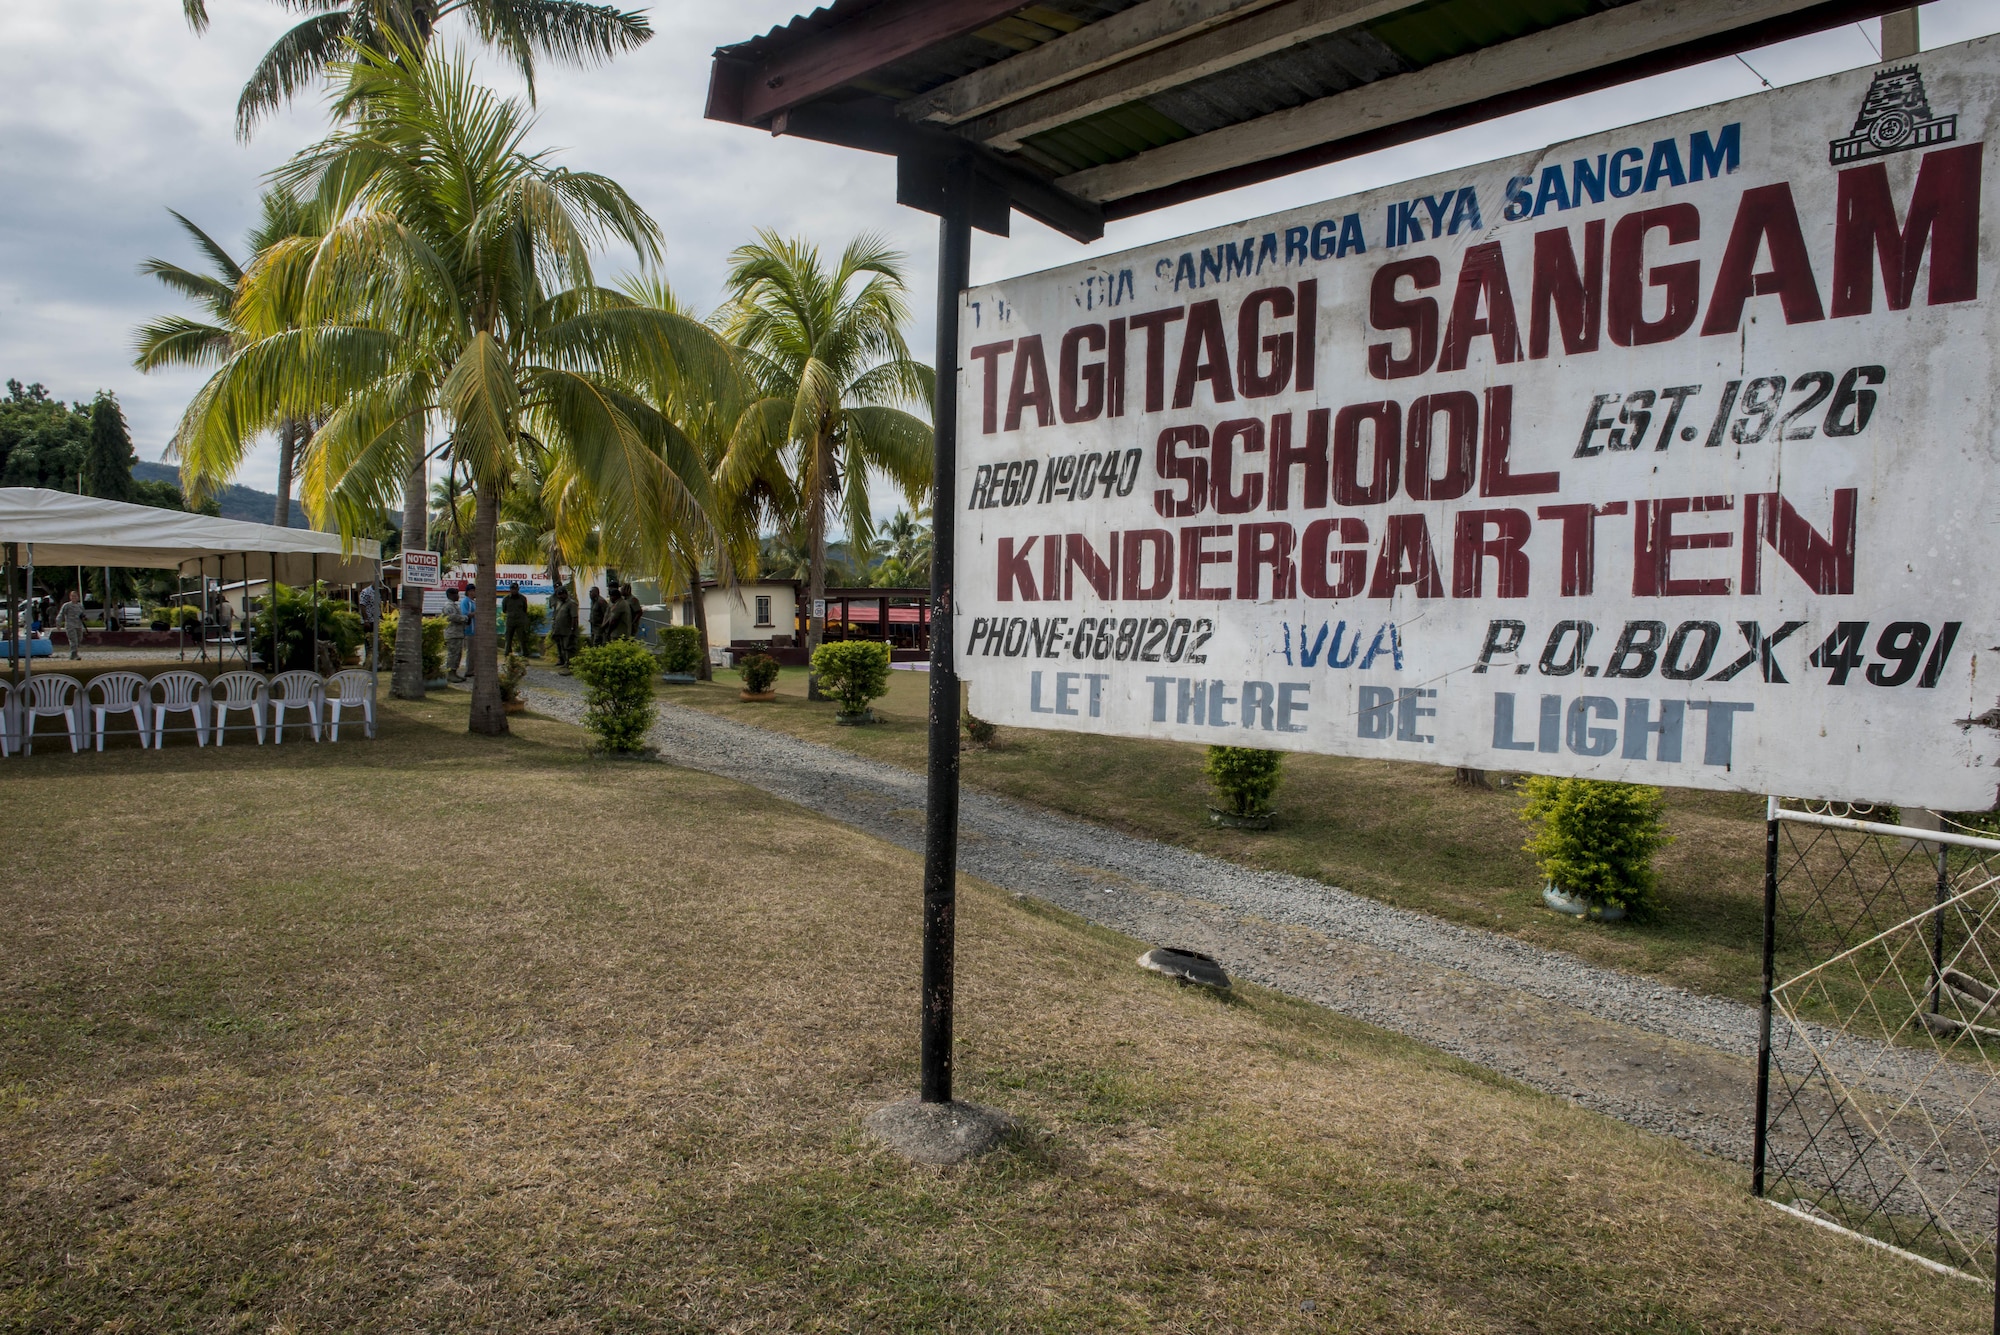 The Tagitagi Sangam School and Kindergarten’s sign stands at the gate to the school where Misawa Air Base, Japan, medics joined more than 50 U.S. service members for Pacific Angel 17-3 in Tavua, Fiji, July 15, 2017. Healthcare professionals representing nearly every unit at the 35th Medical Group flew to Fiji from Misawa July 10 with stops in Tokyo and Anderson Air Force Base, Guam. In Guam, they boarded an Air National Guard KC-135 Stratotanker from Fairchild Air Force Base, Washington, to make the final trek with the rest of the main body who flew from each of their respective bases for the final flight from Guam. (U.S. Air Force photo by Tech. Sgt. Benjamin W. Stratton)